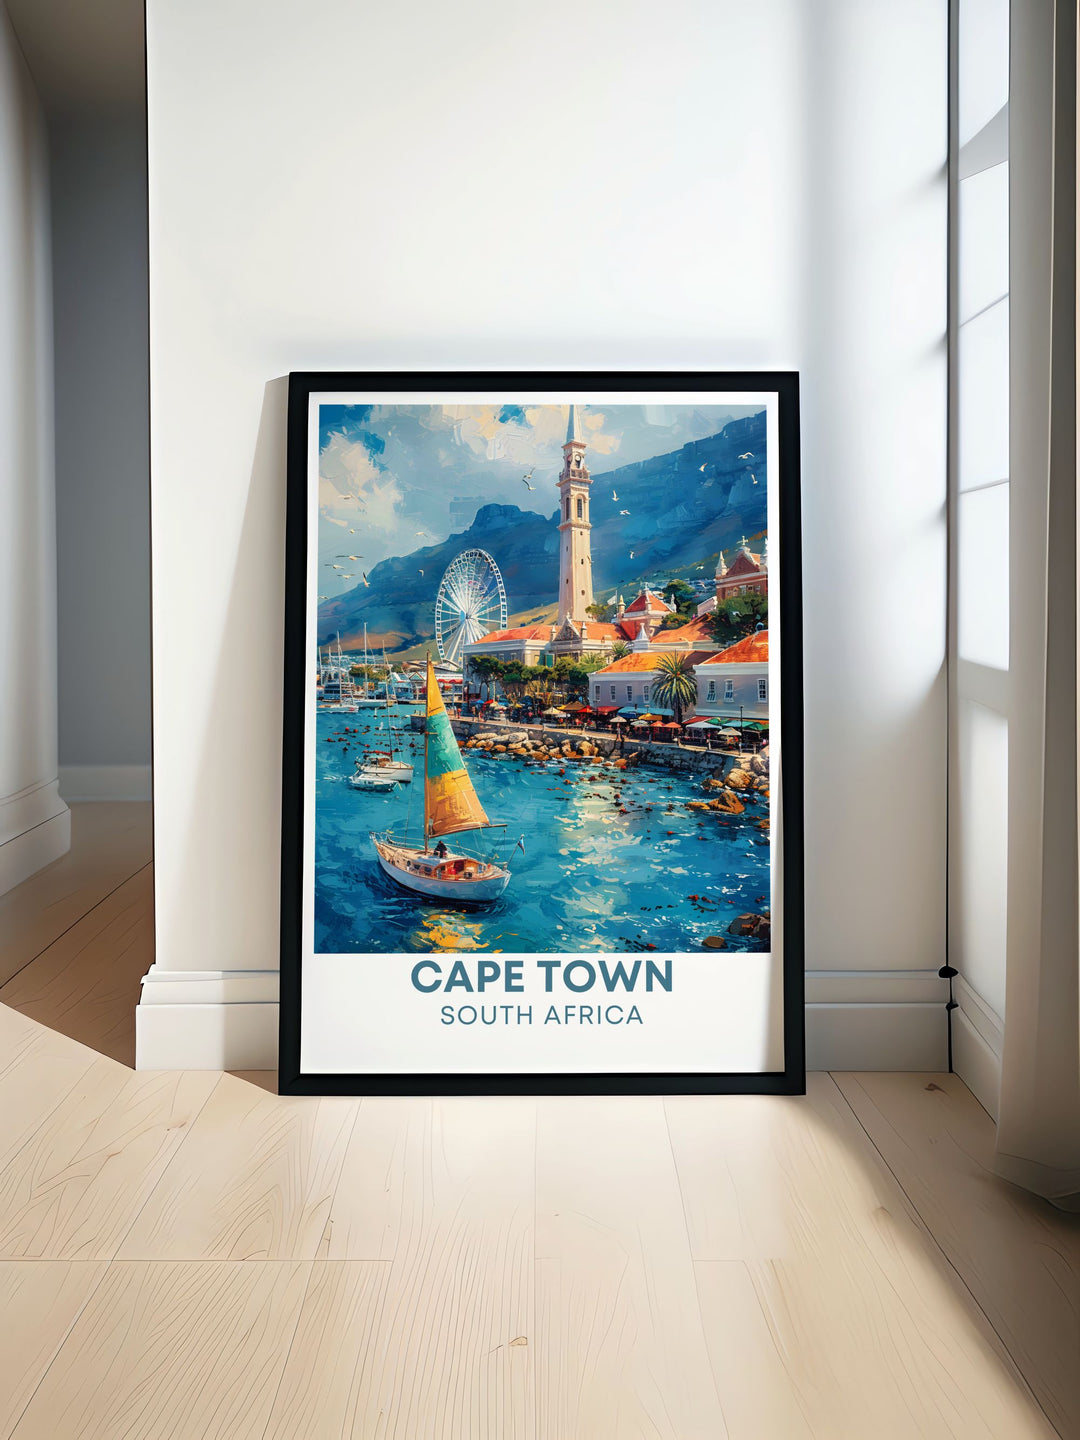 Showcasing the dynamic environment of the Victoria & Alfred Waterfront and the impressive slopes of Table Mountain, this travel poster adds a unique touch of urban and natural elegance to your living space.